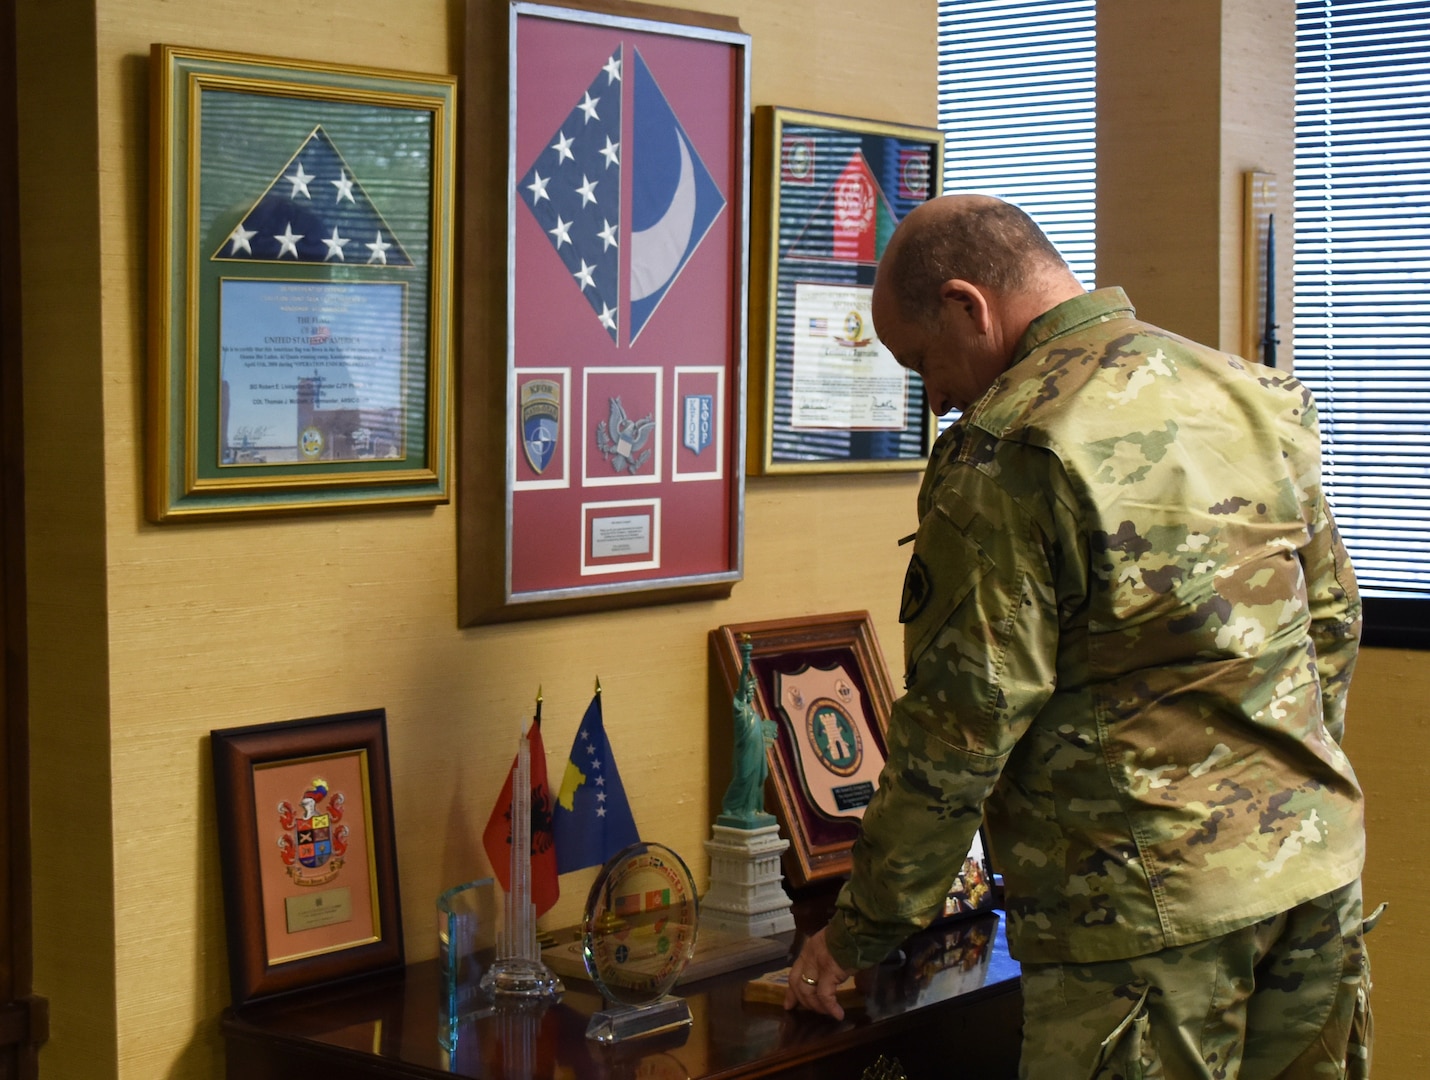 U.S. Army Maj. Gen. Robert E. Livingston, Jr., the adjutant general for South Carolina, looks over memorabilia and plaques in his office at the South Carolina Military Department headquarters in Columbia, South Carolina, Jan. 24, 2019.